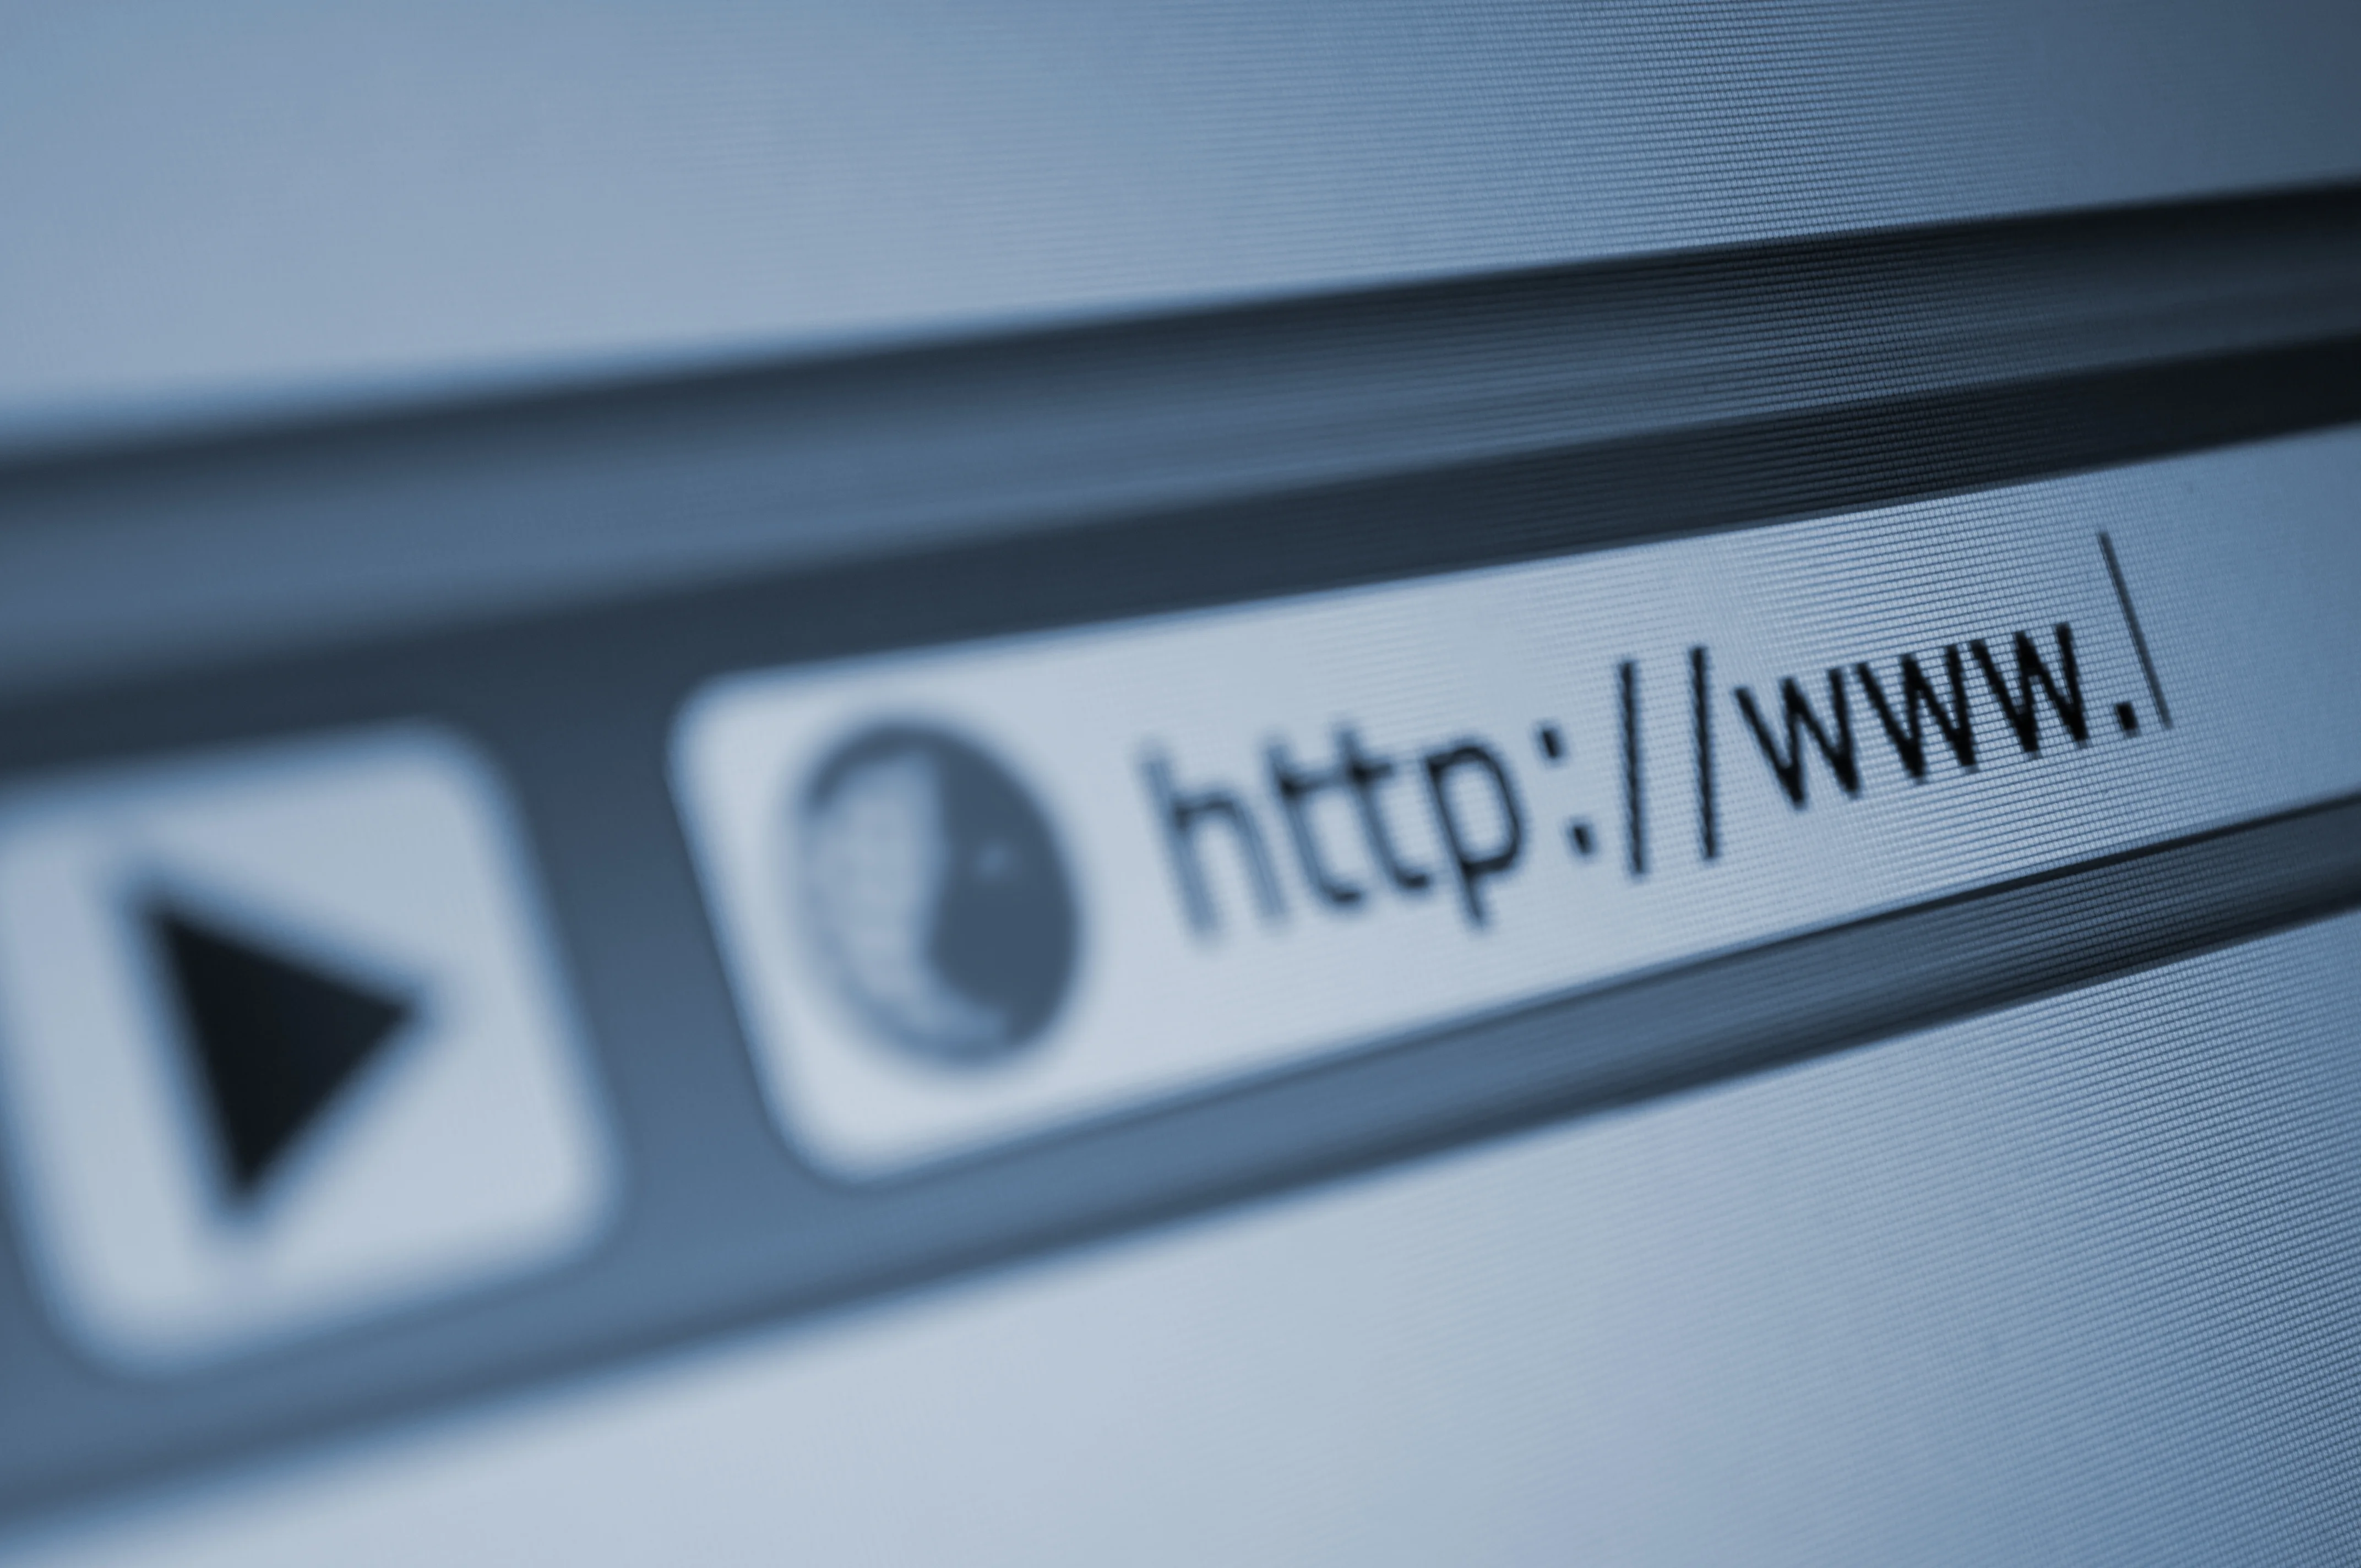 .ca or .com: Which domain is better for your website? 